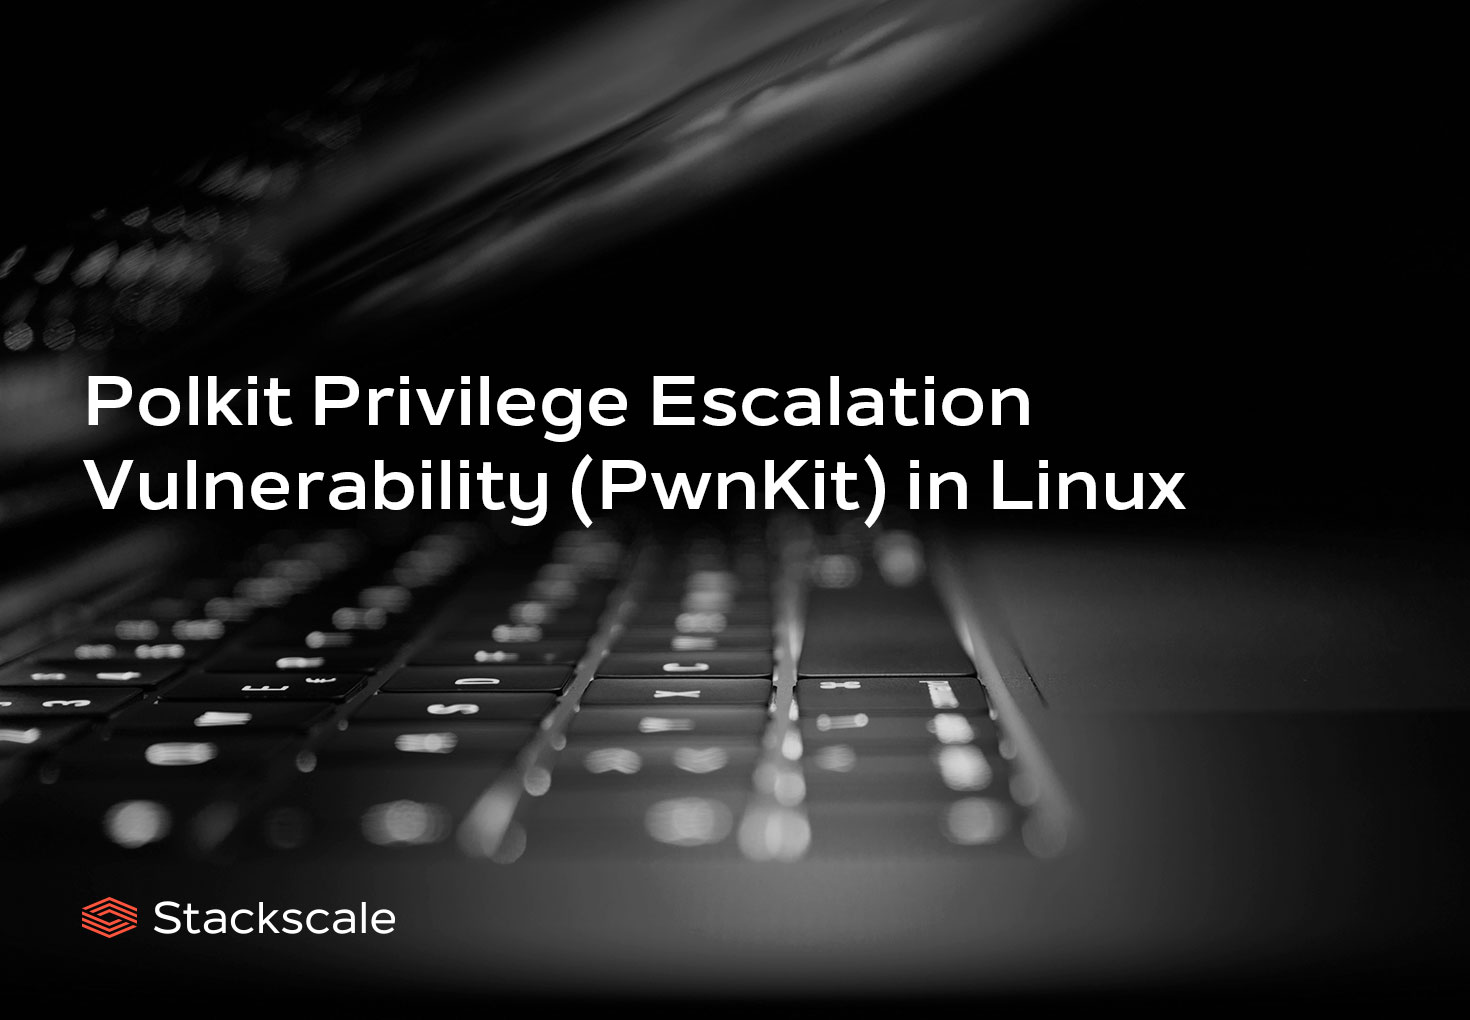 Important security patch for Polkit Privilege Escalation Vulnerability (PwnKit) in Linux